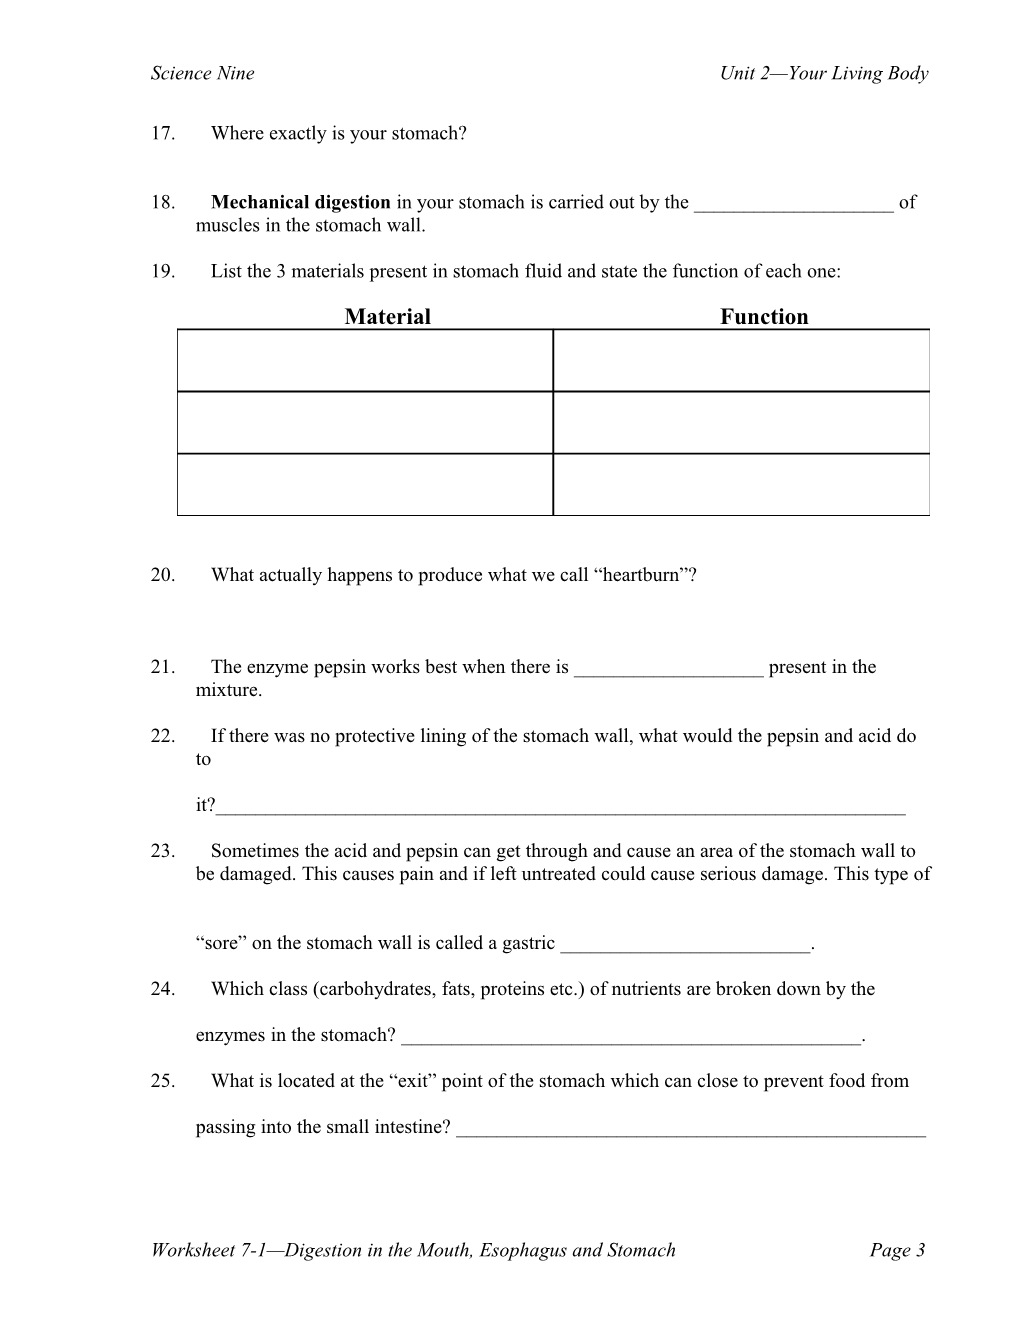 Worksheet 7-1 Digestion in the Mouth, Esophagus and Stomach